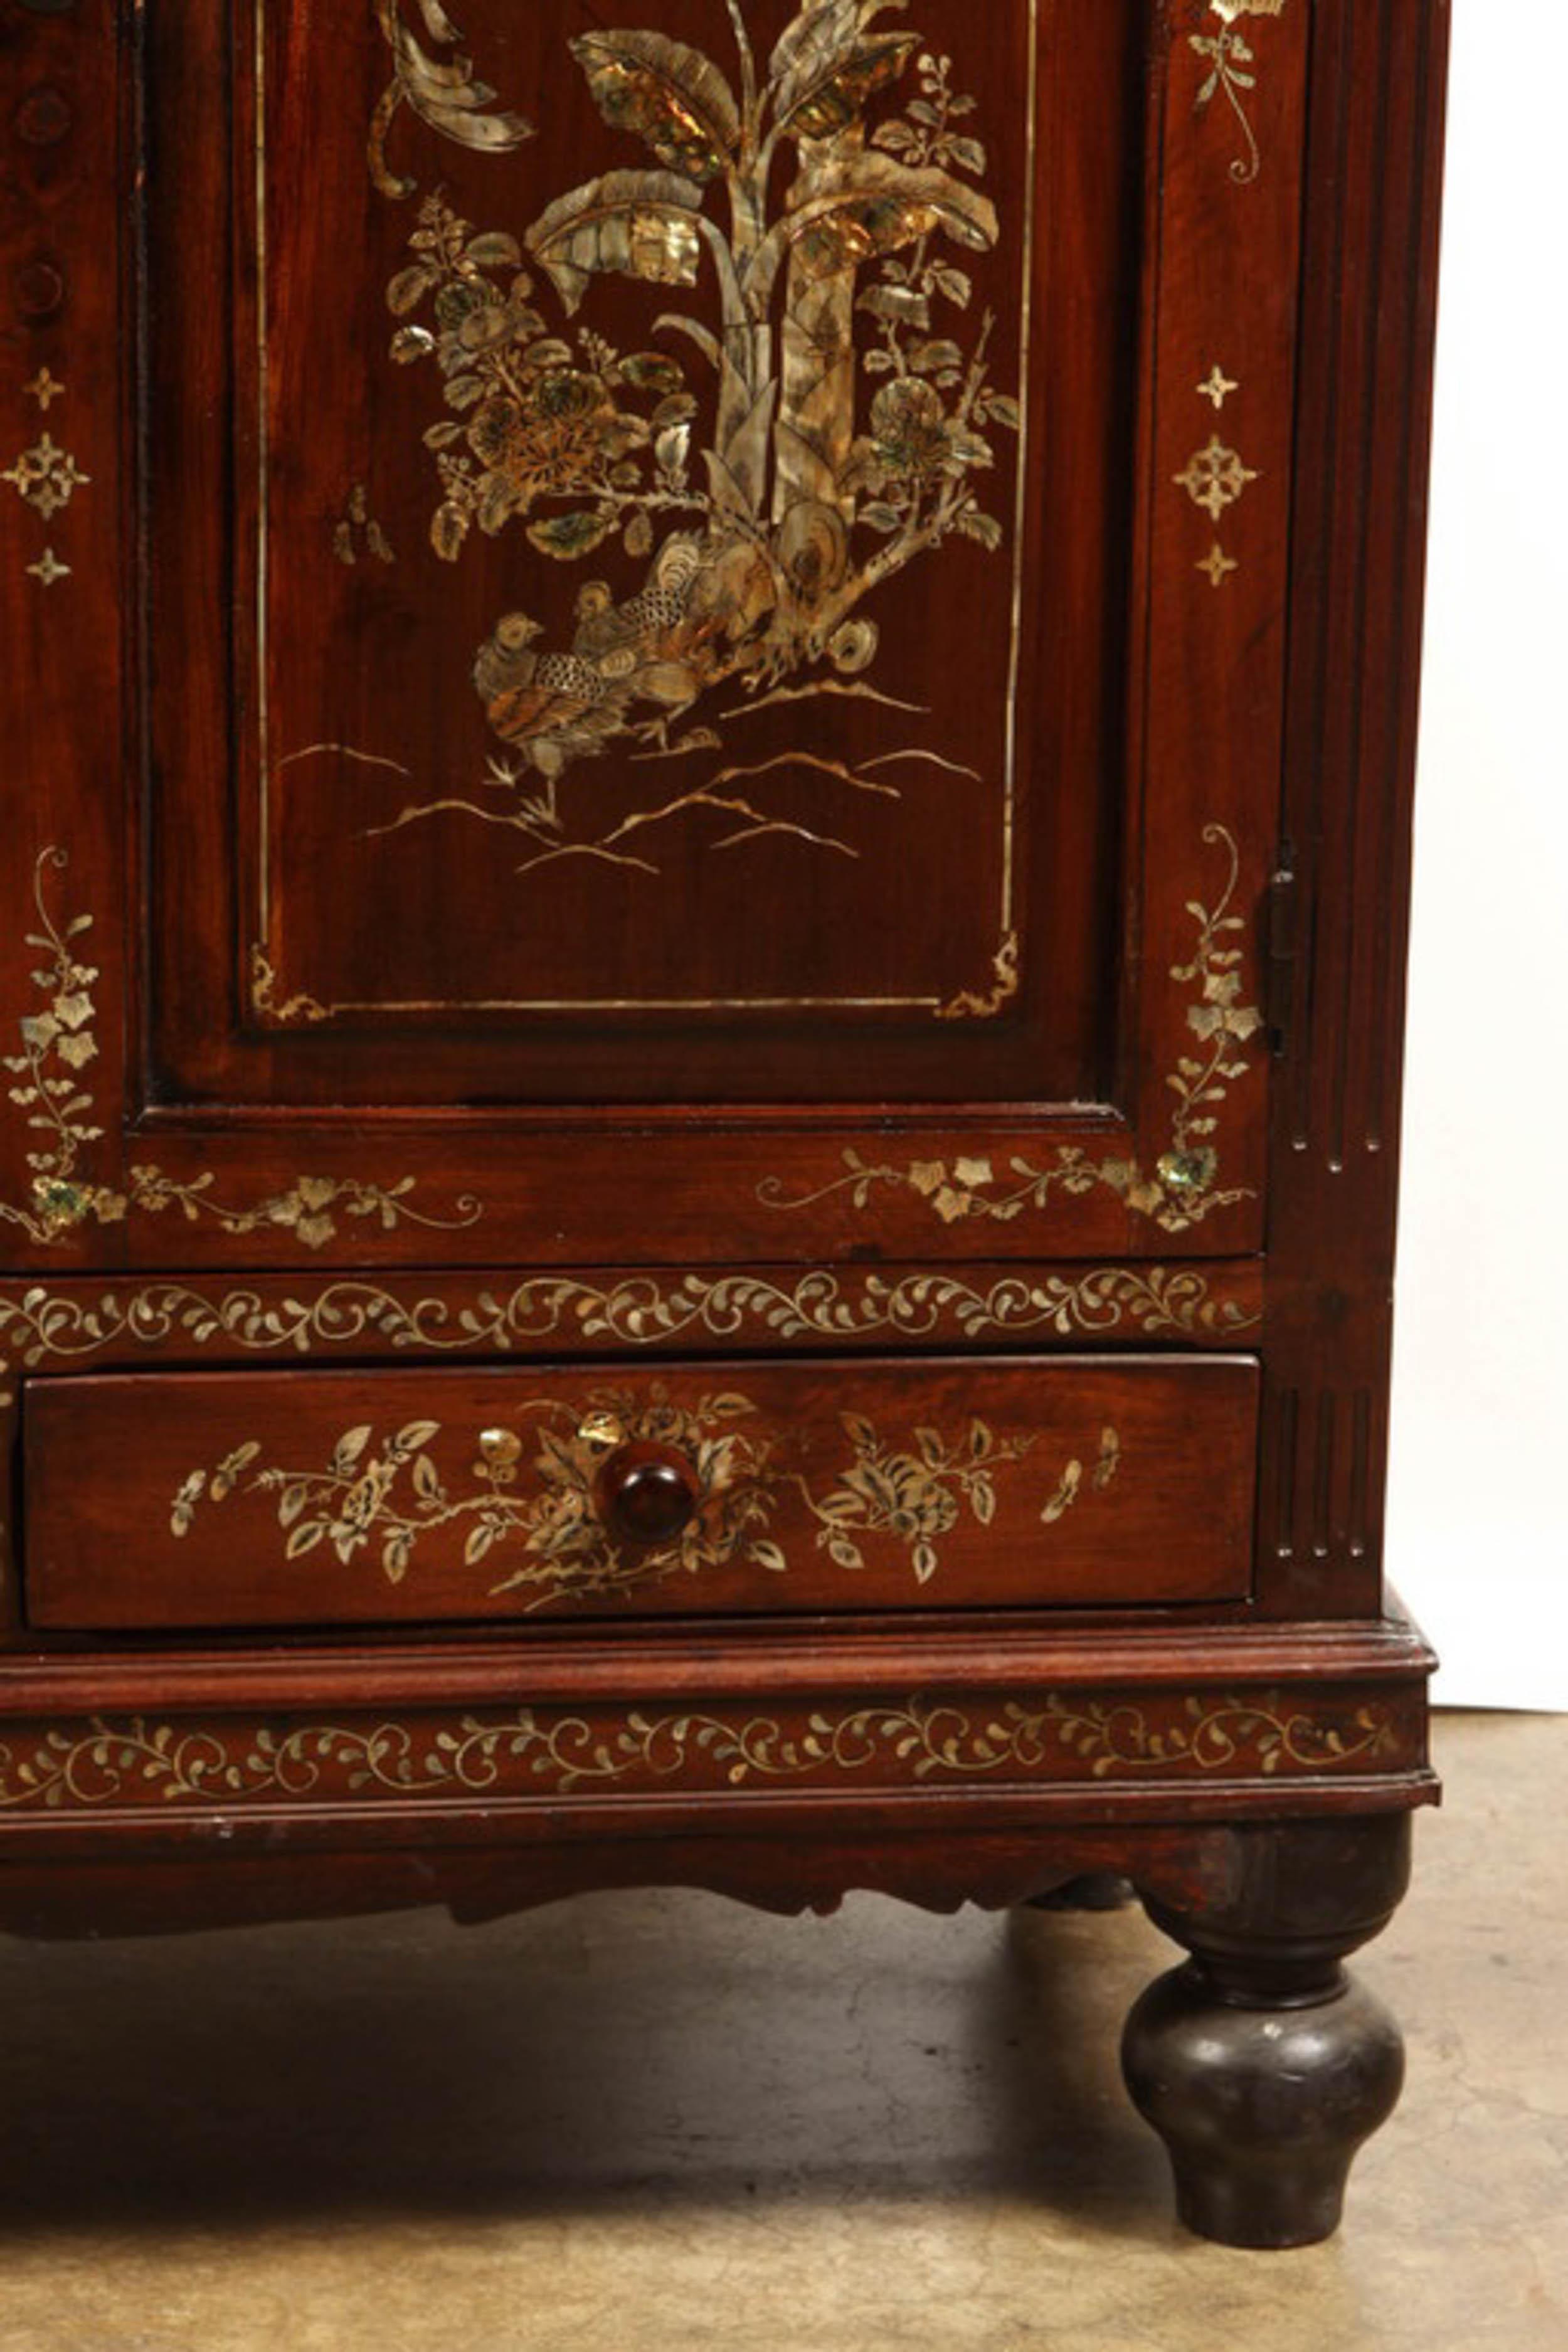 A solid rosewood cabinet with the front richly inlaid with mother of pearl depicting palm trees and birds. Made in Vietnam for the export market. The two doors open to reveal a compartment divided by a single shelf, over two drawers. All on four